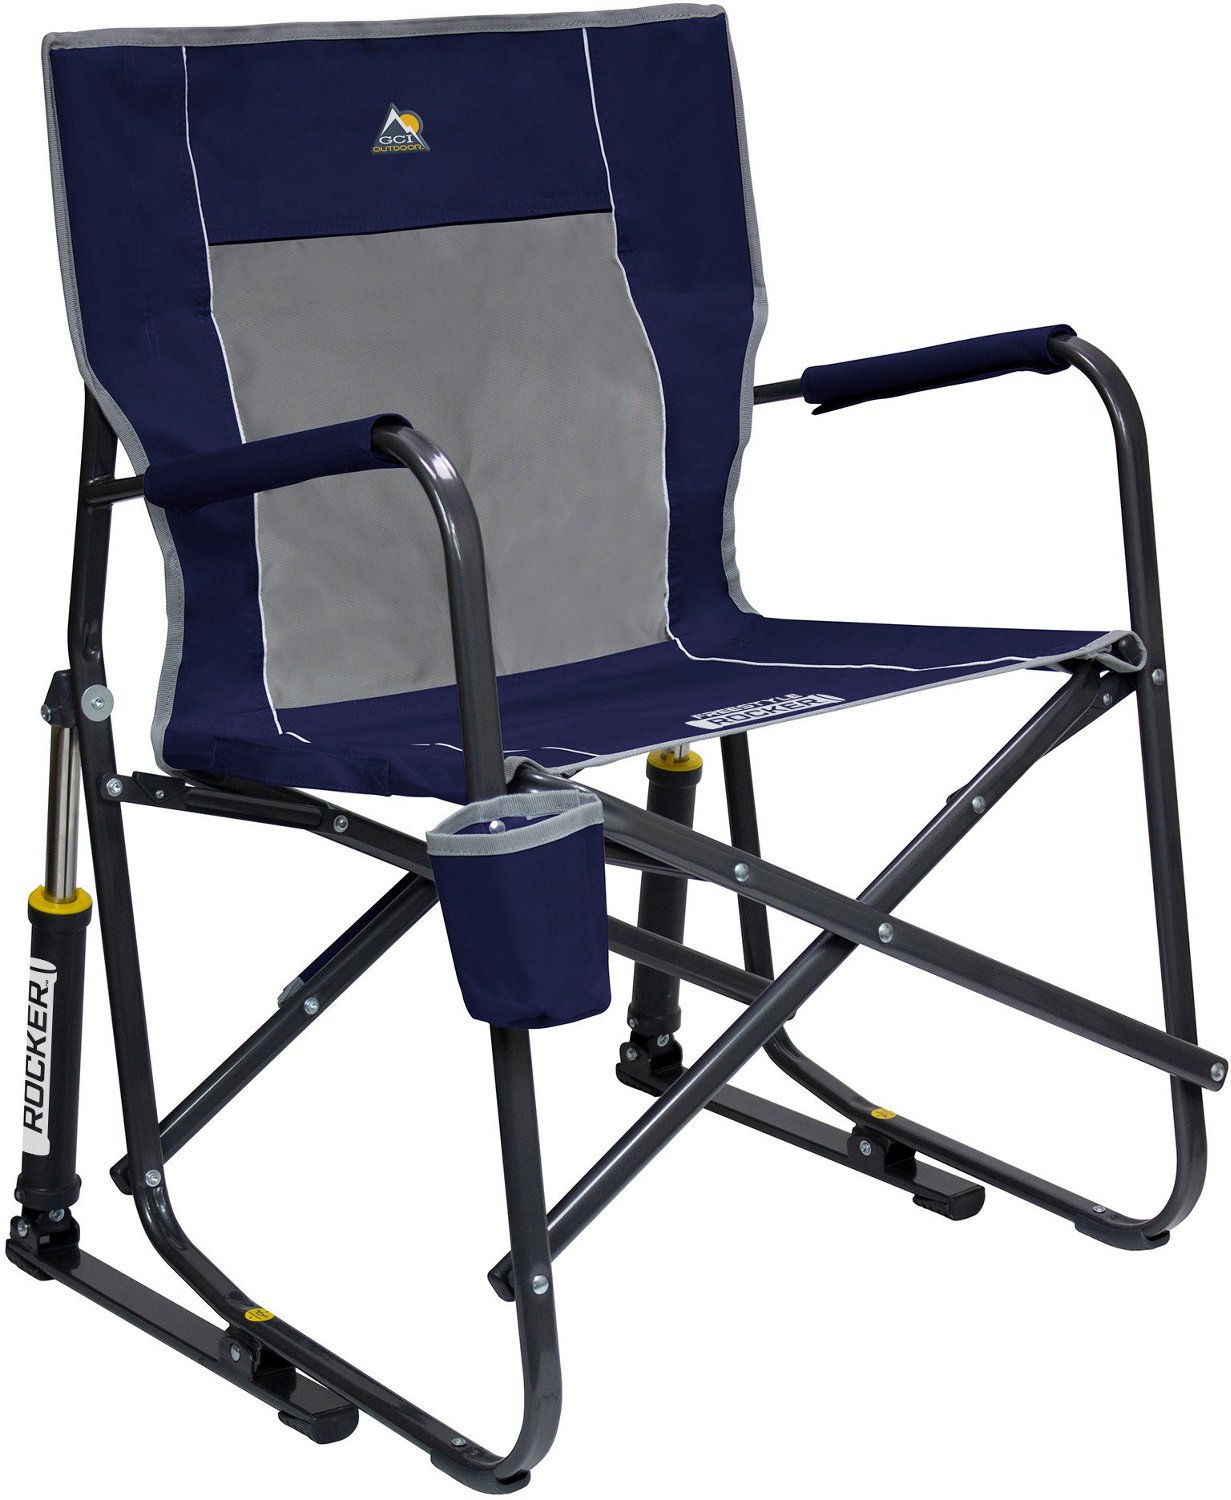 academy sports lawn chairs